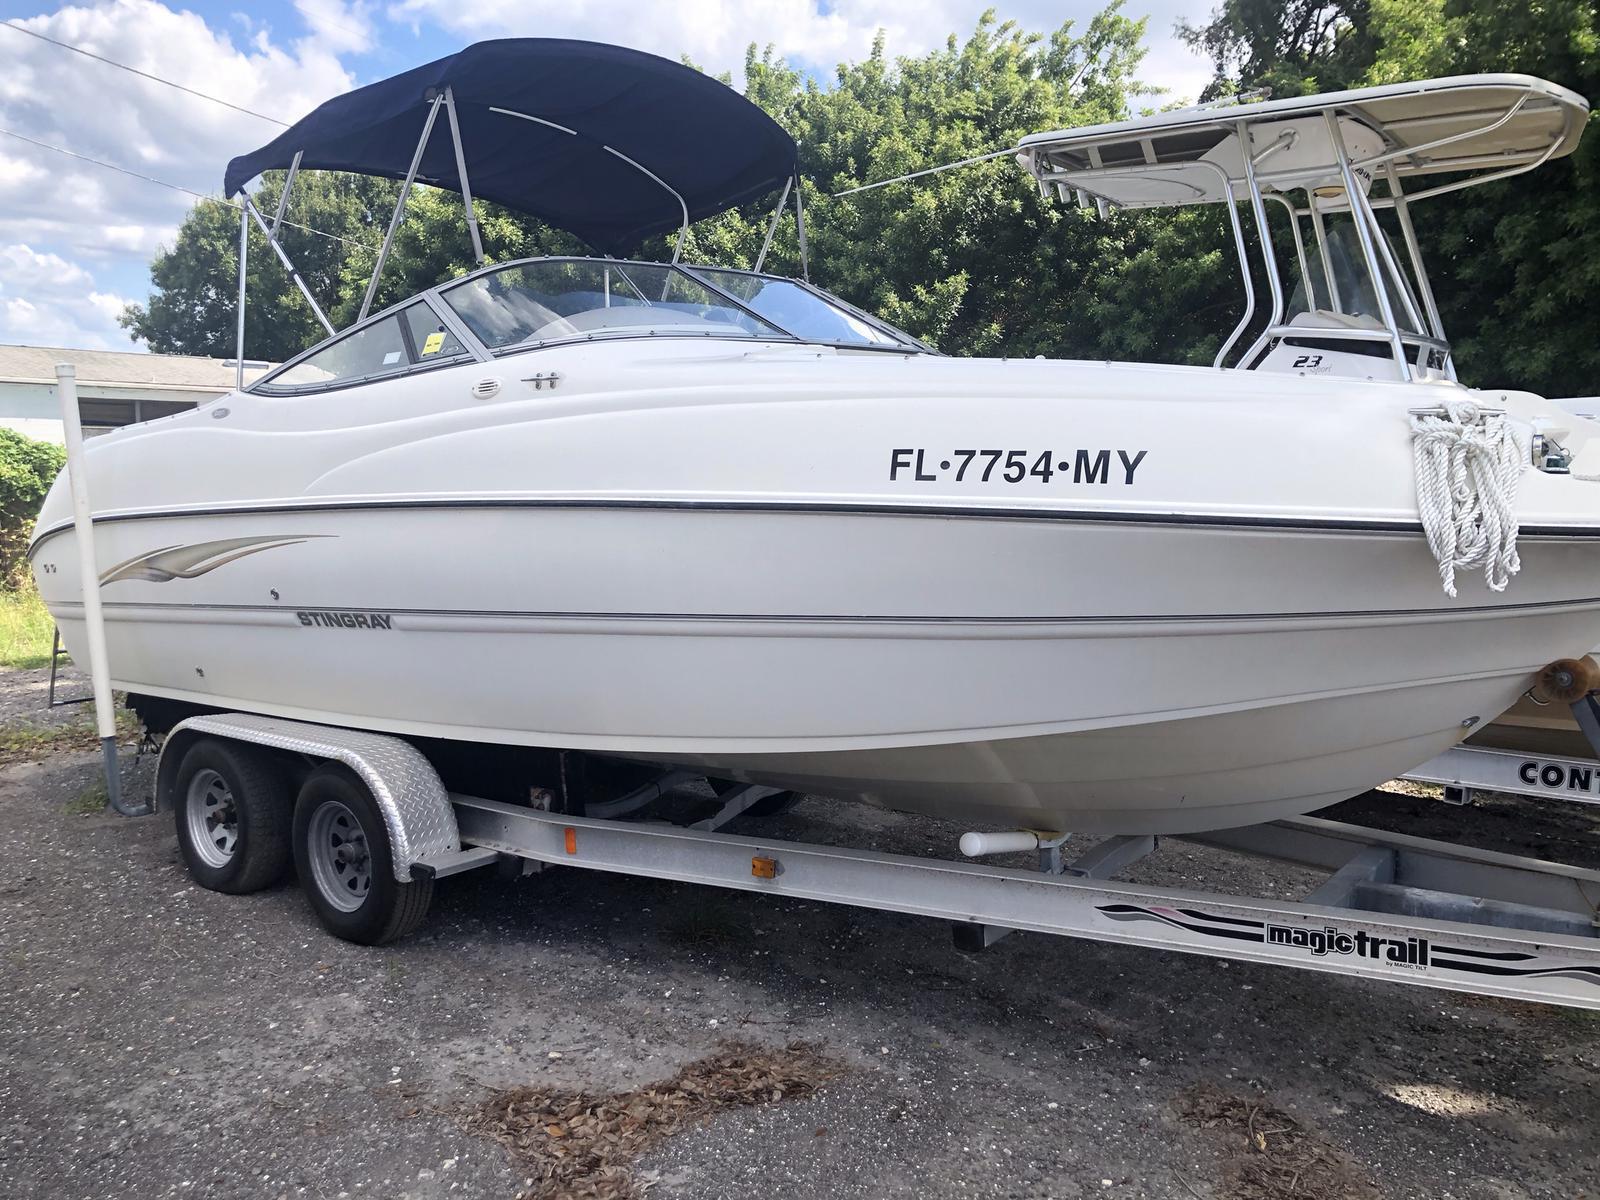 page 7 of 7 - used deck boat for sale in florida - boats.com